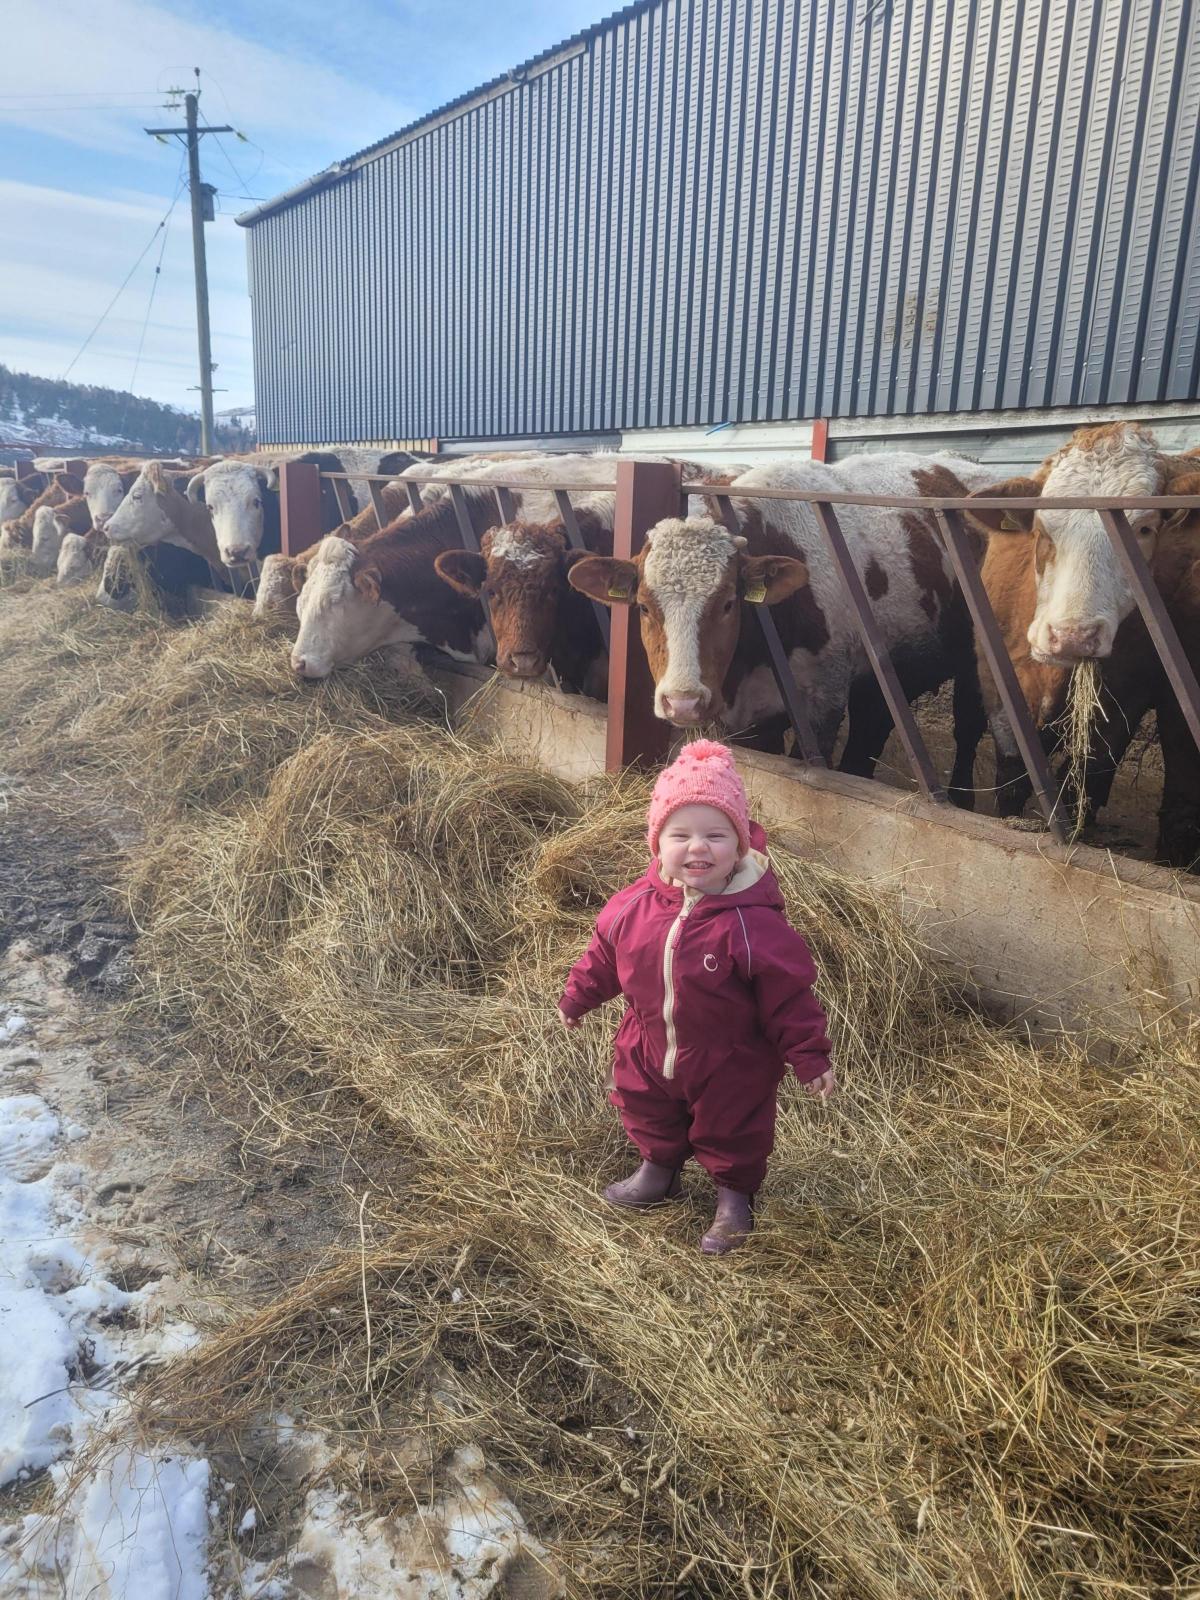 Elaine Mavor - Picture of Beth Mavor in February 2022 - The boss checking to make sure Danda is feeding the cows properly